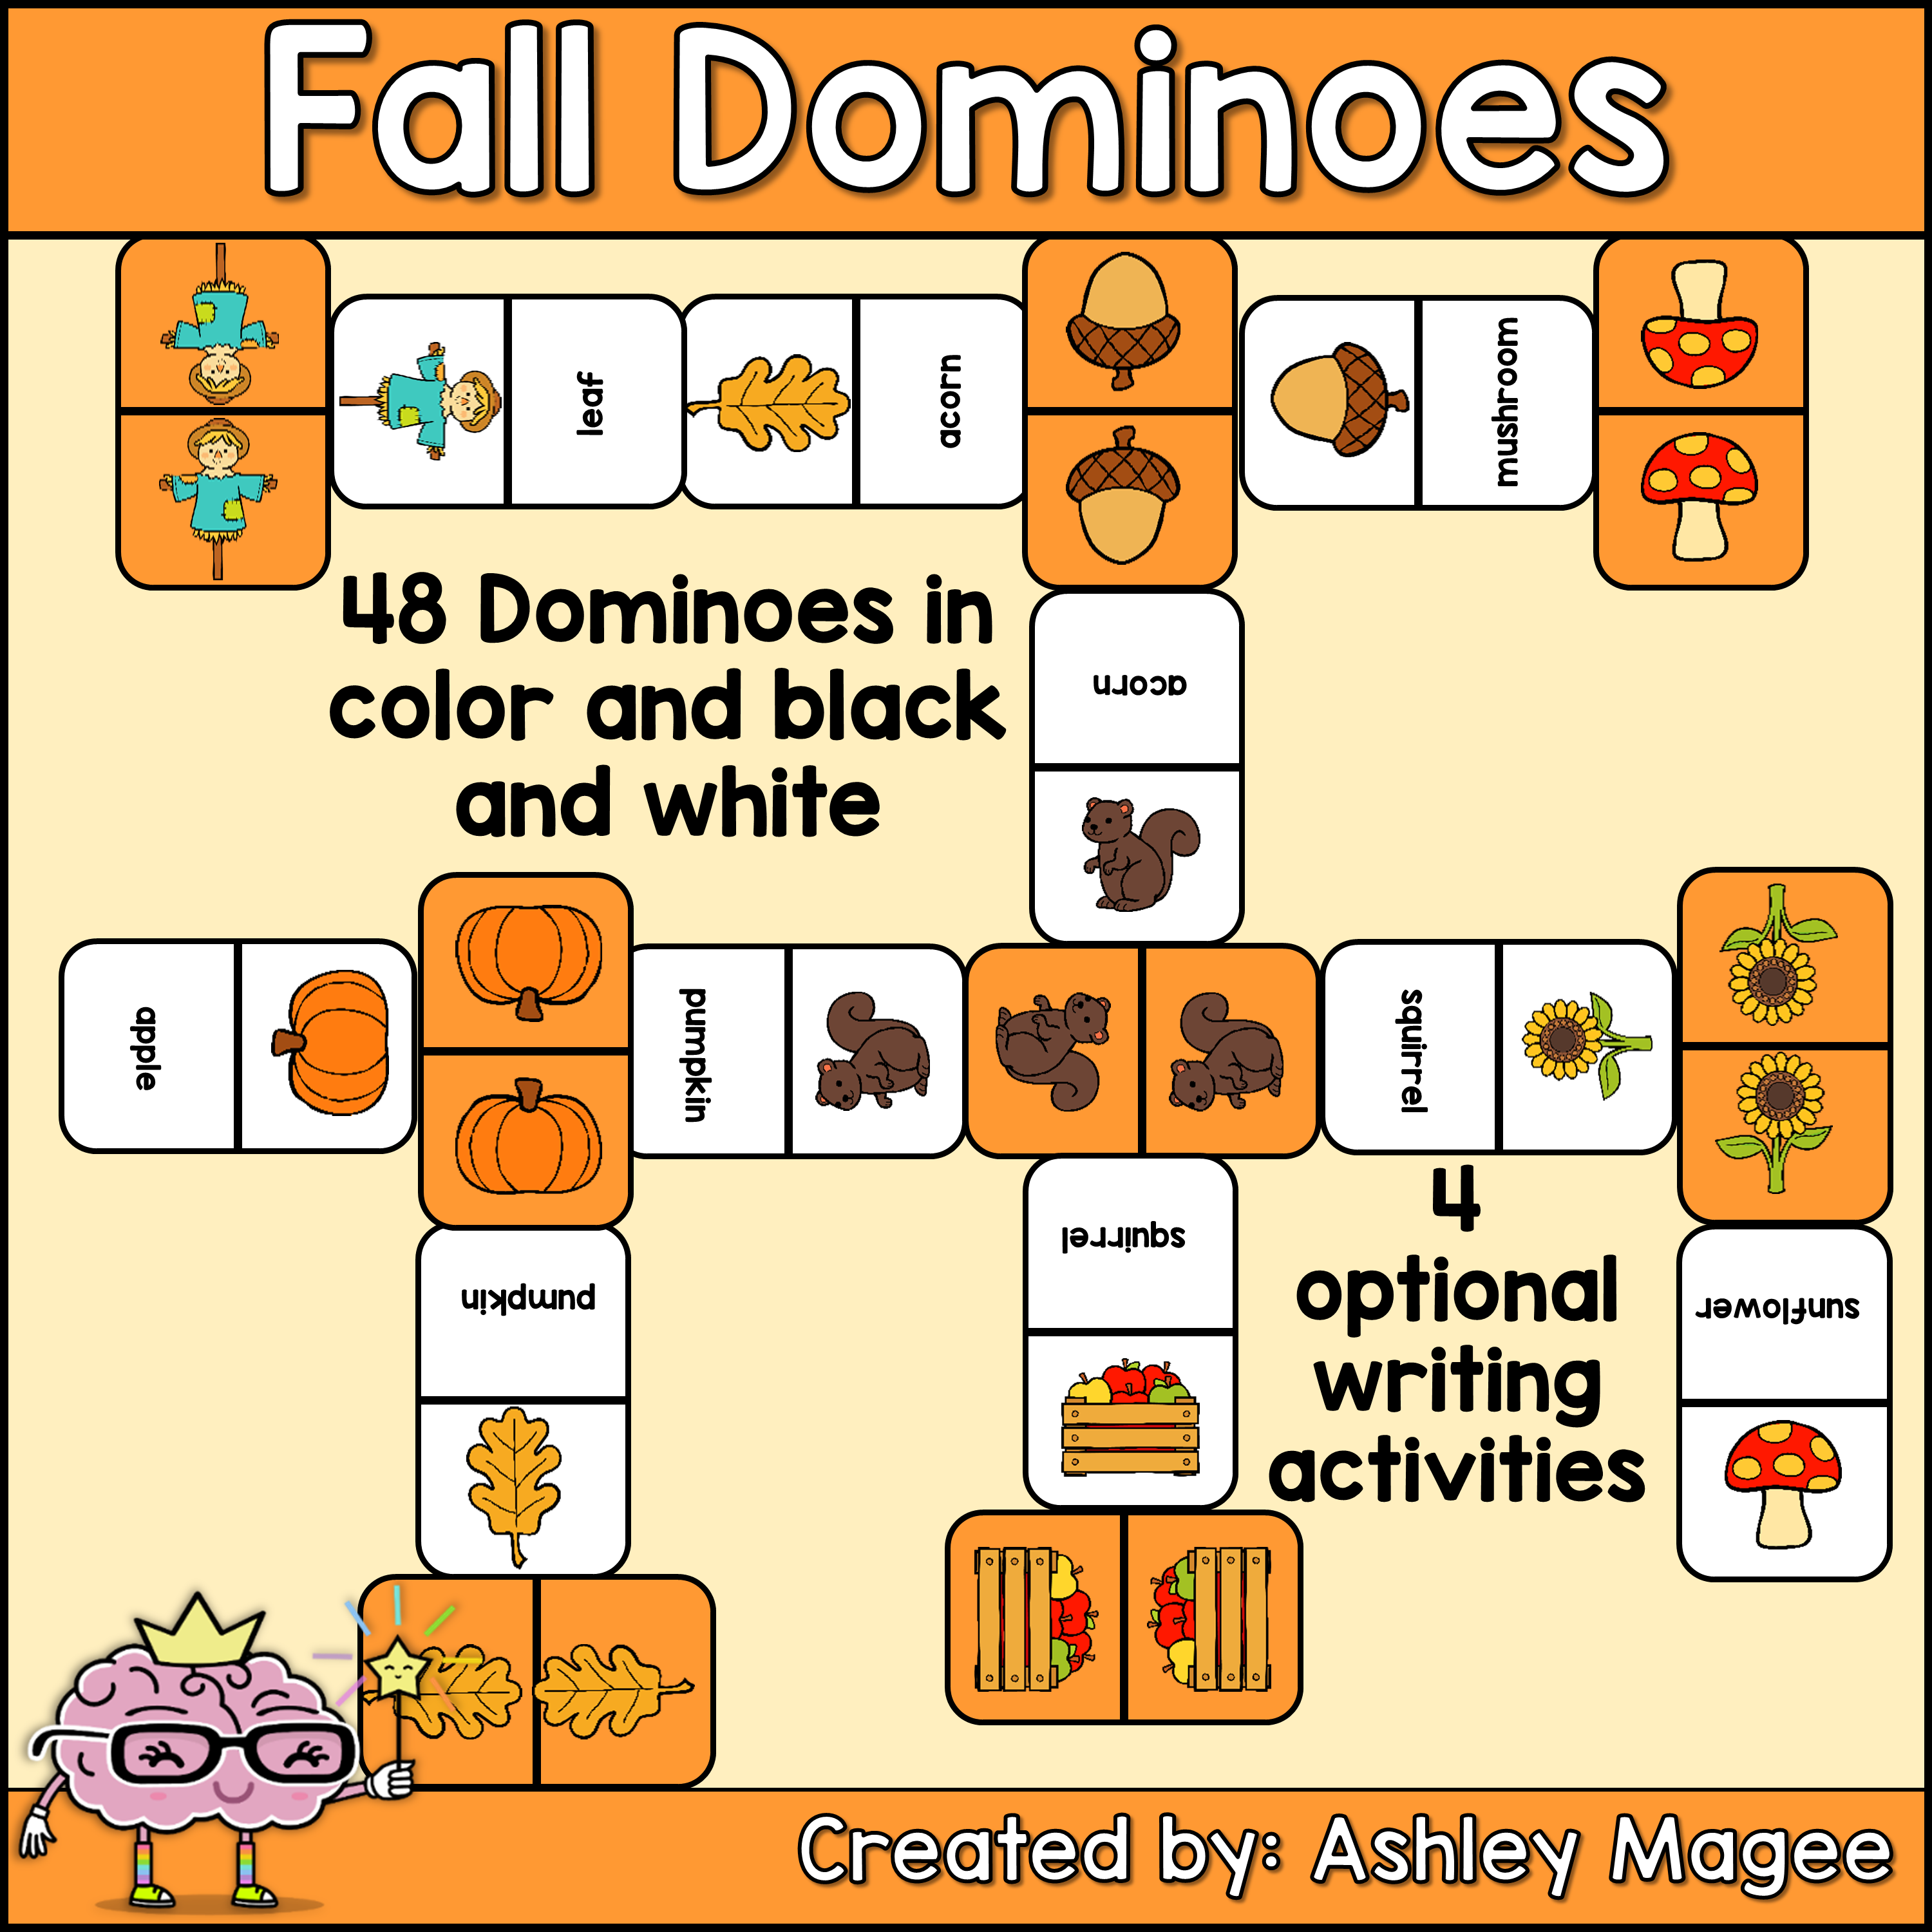 Fall domino game with writing activity options